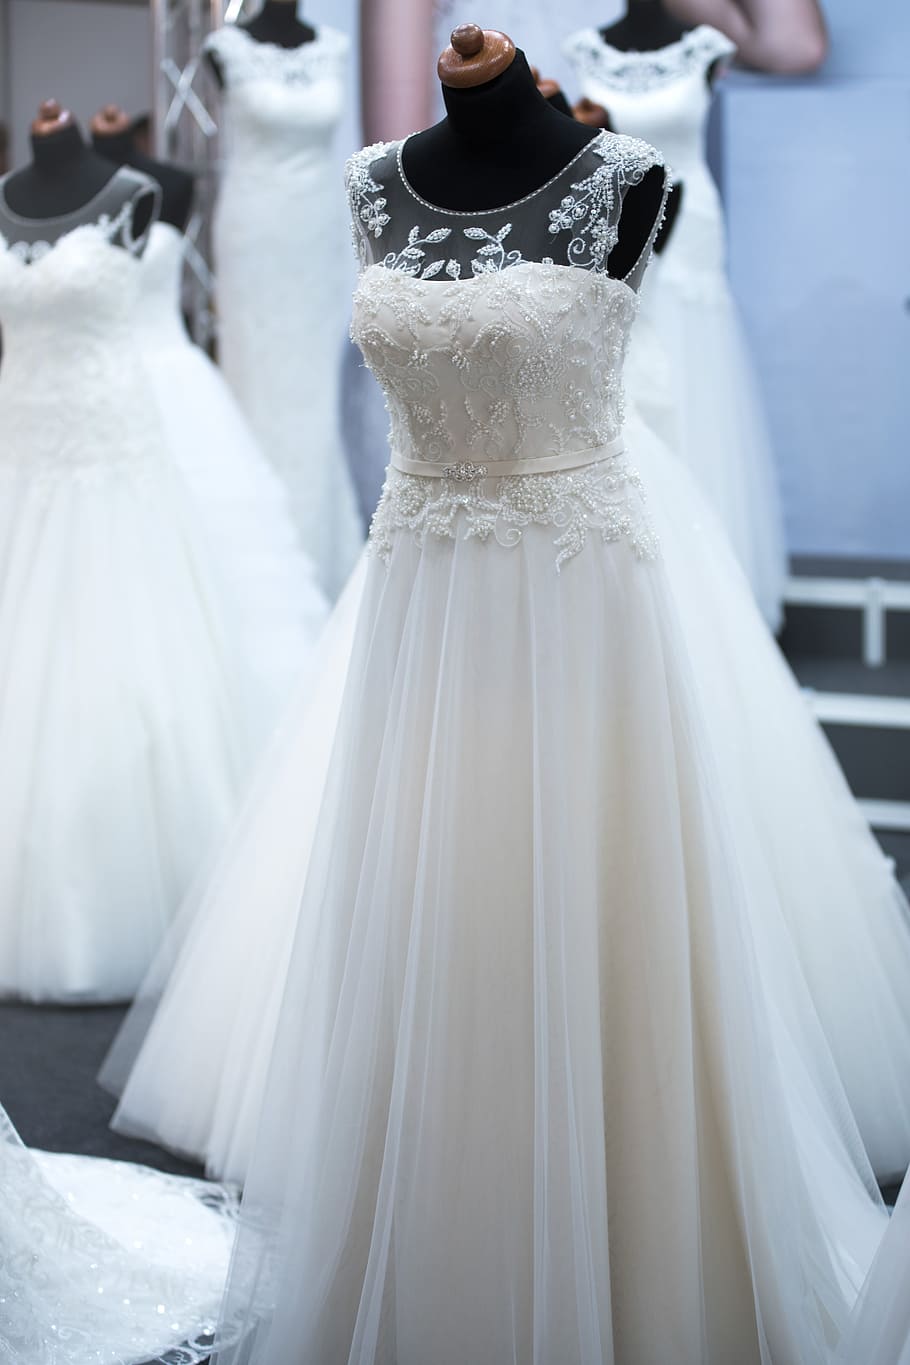 Sexy Wedding Dresses & Gowns - Largest Selection - Kleinfeld | Kleinfeld  Bridal